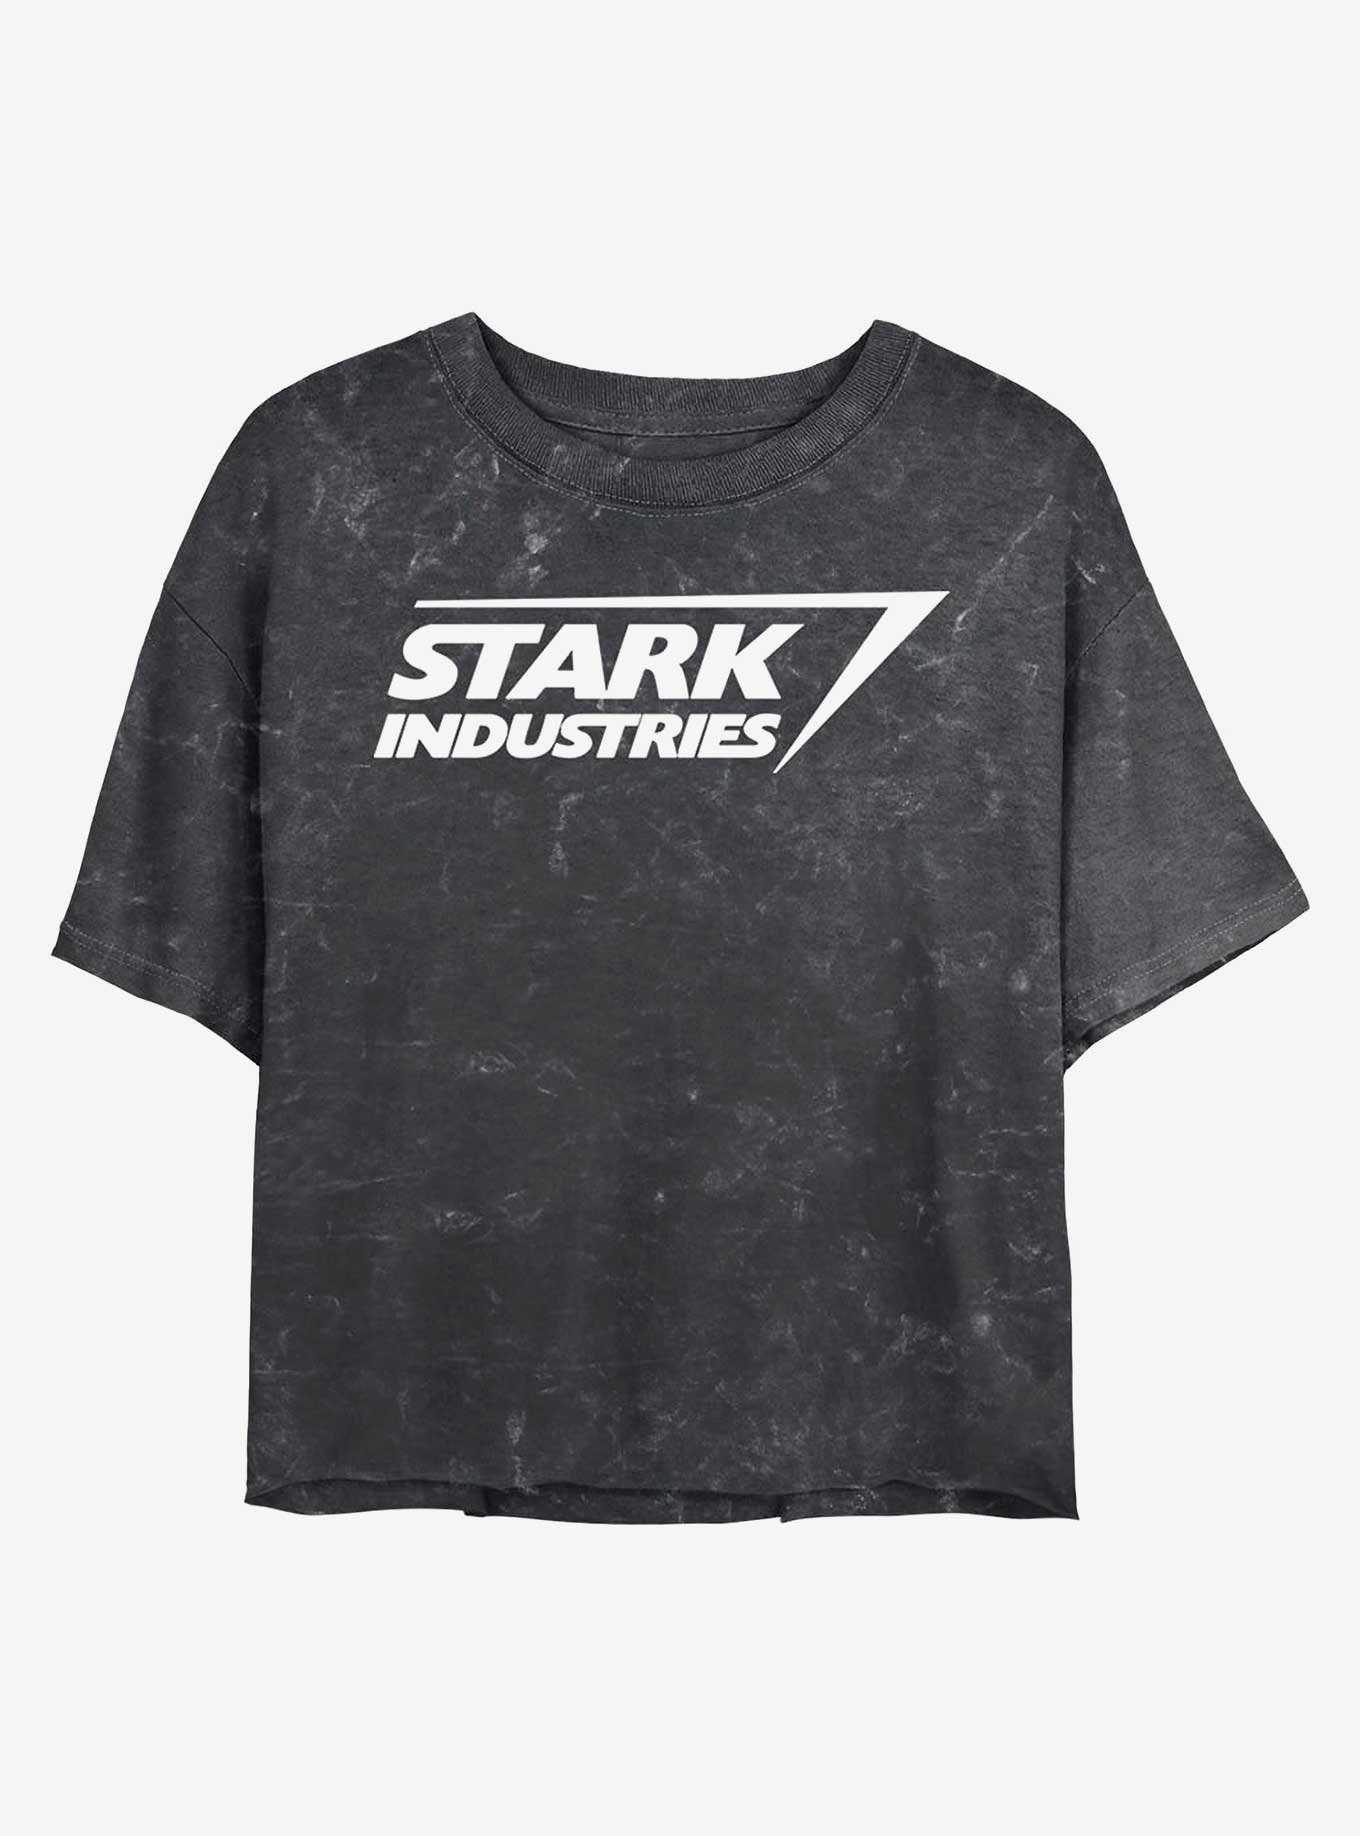 OFFICIAL Iron Man Hot Topic T-Shirts Merchandise | 